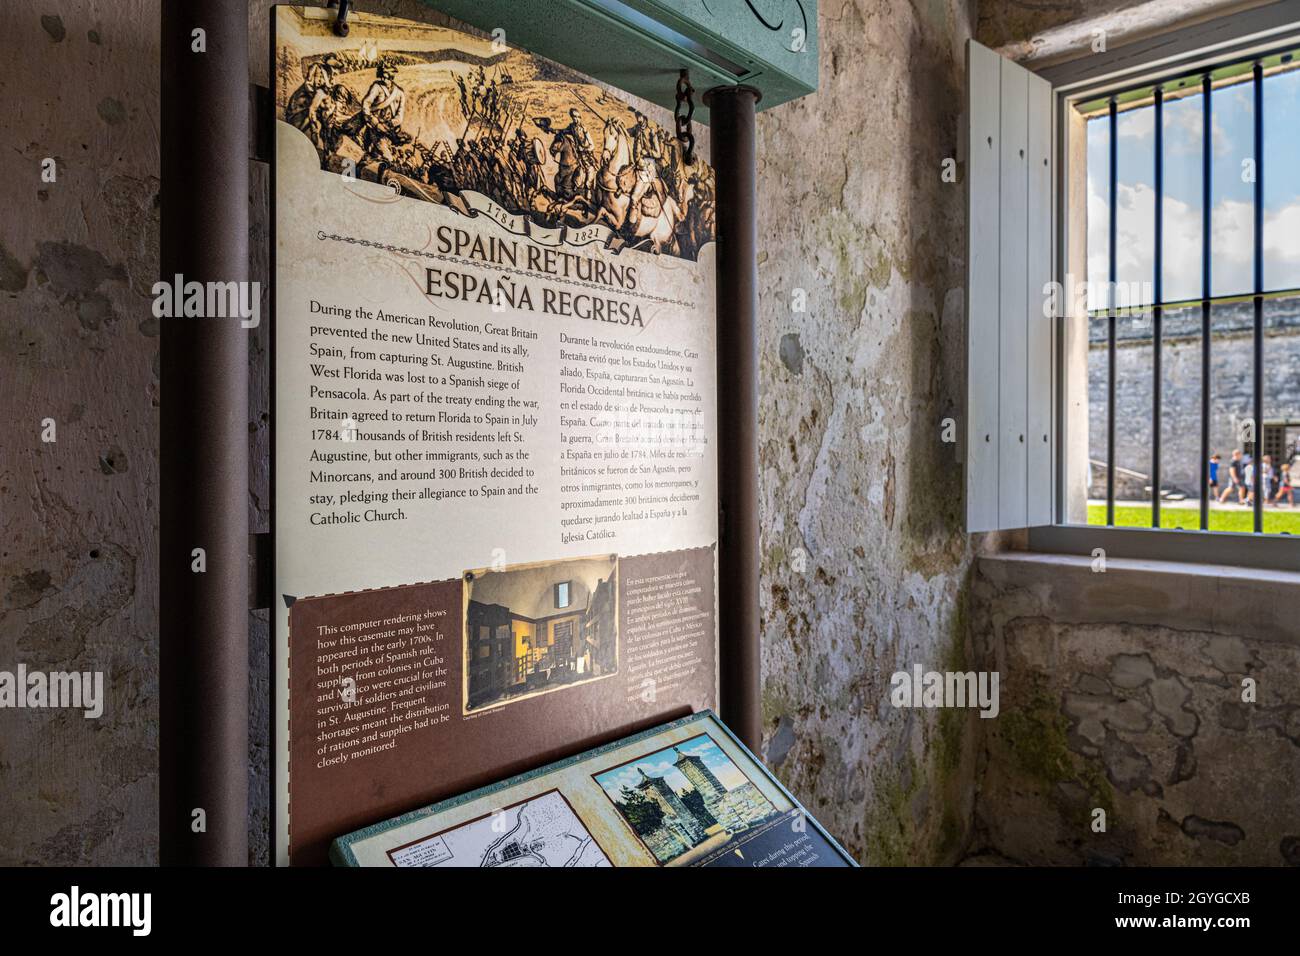 Historical display in a vaulted chamber within Castillo de San Marcos, the oldest masonry fort in the continental United States, in St. Augustine, FL. Stock Photo